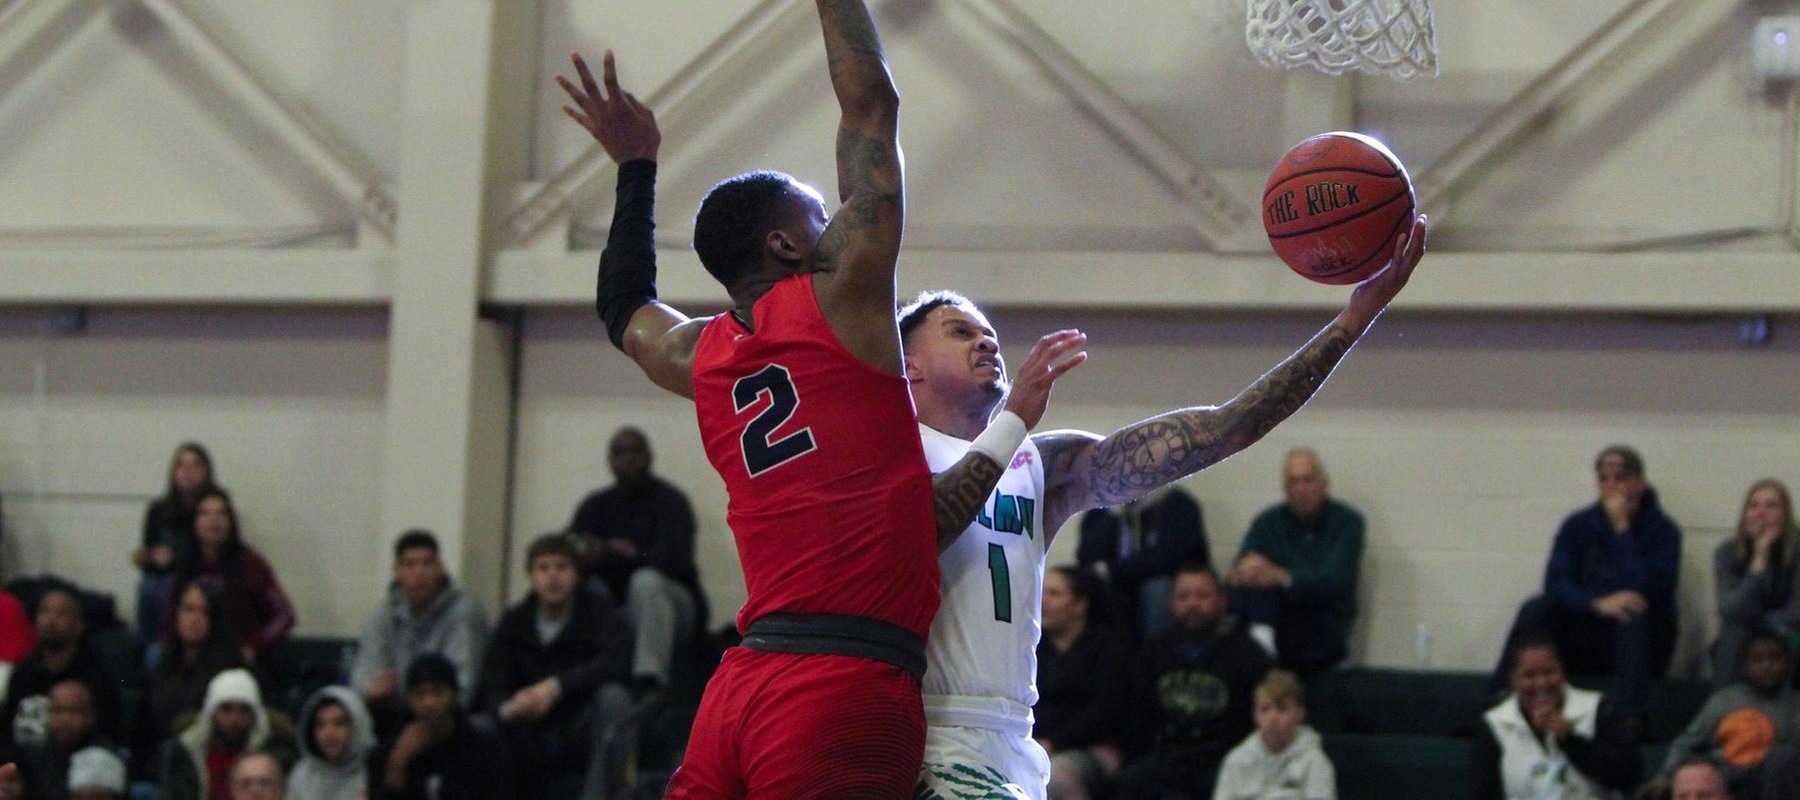 Photo of Jermaine Head who led the Wildcats with 24 points against Shippensburg. Copyright 2019; Wilmington University. All rights reserved. Photo by Samantha Kelley. November 16, 2019 vs. Shippensburg.